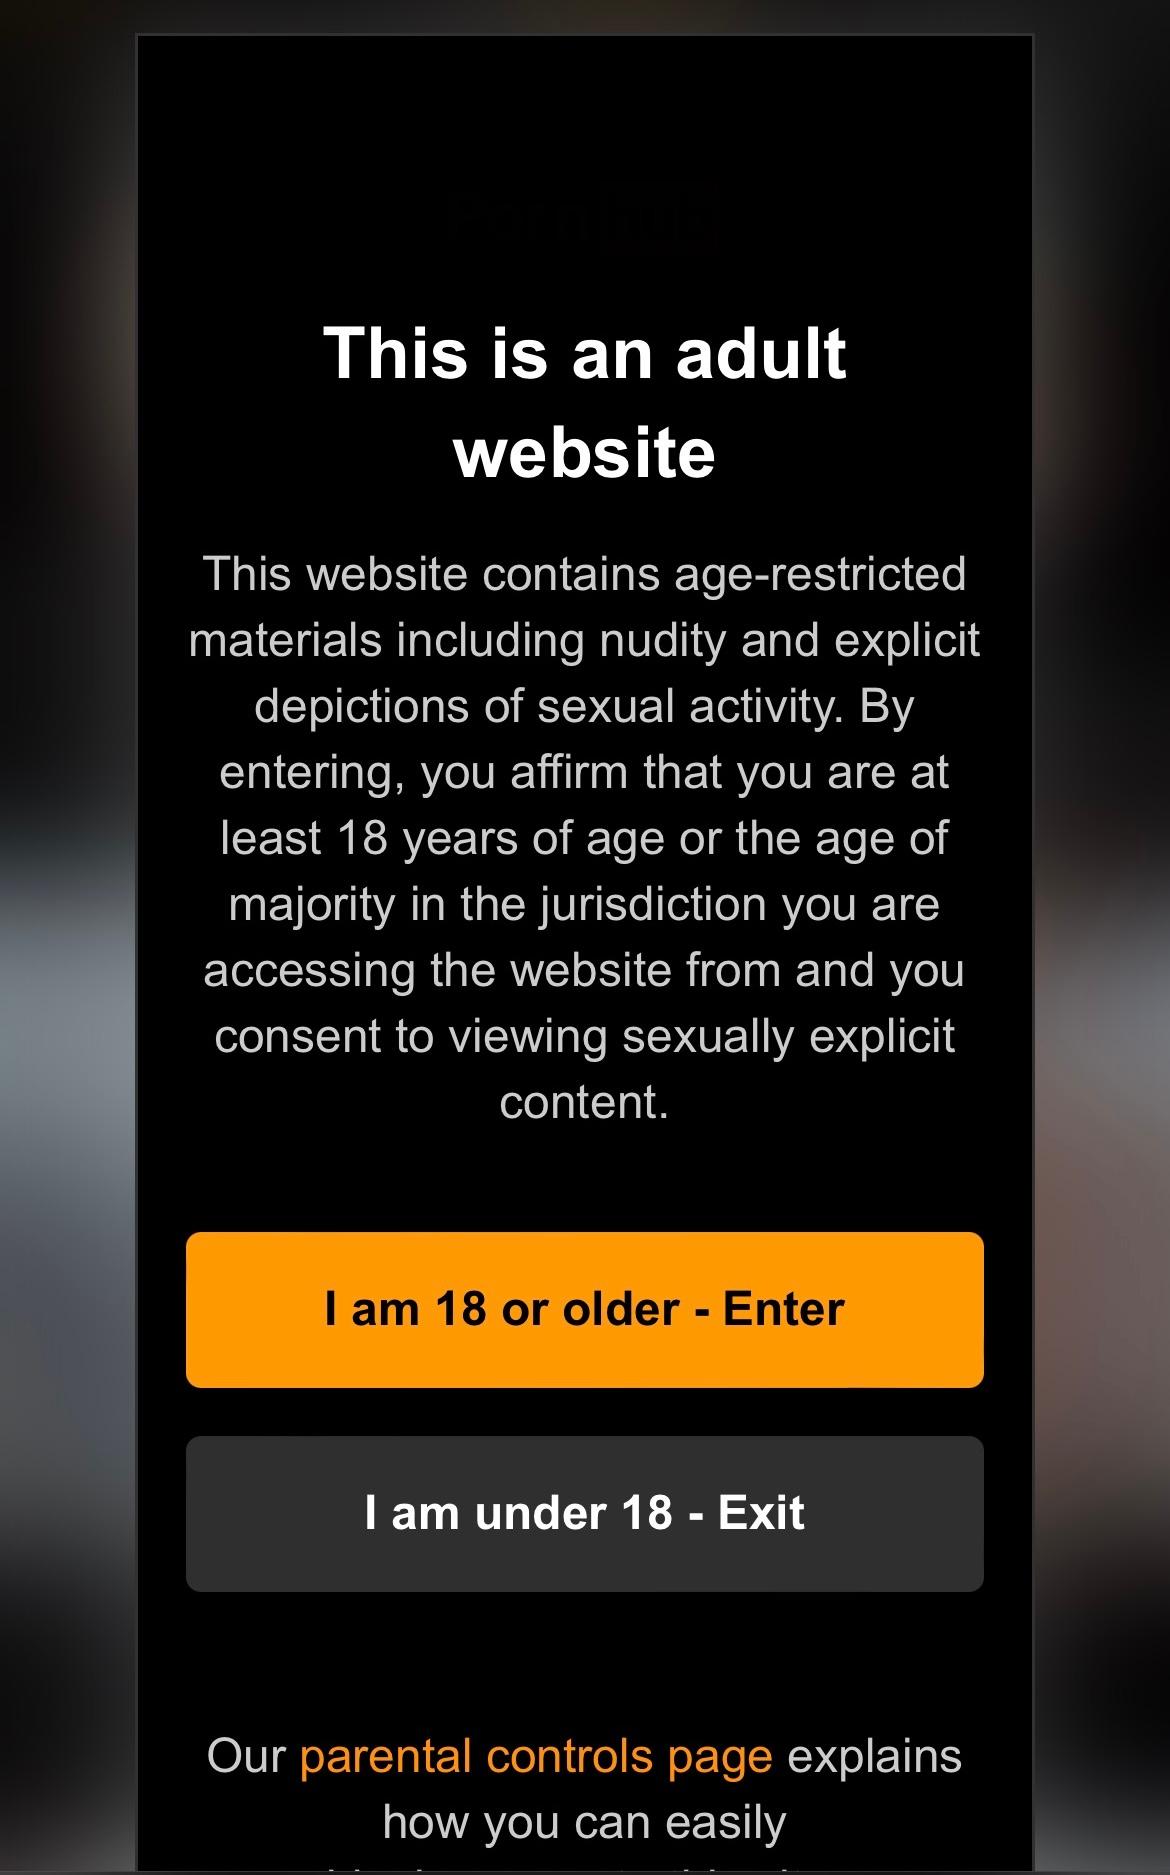 Warning message to users attempting to access adult websites